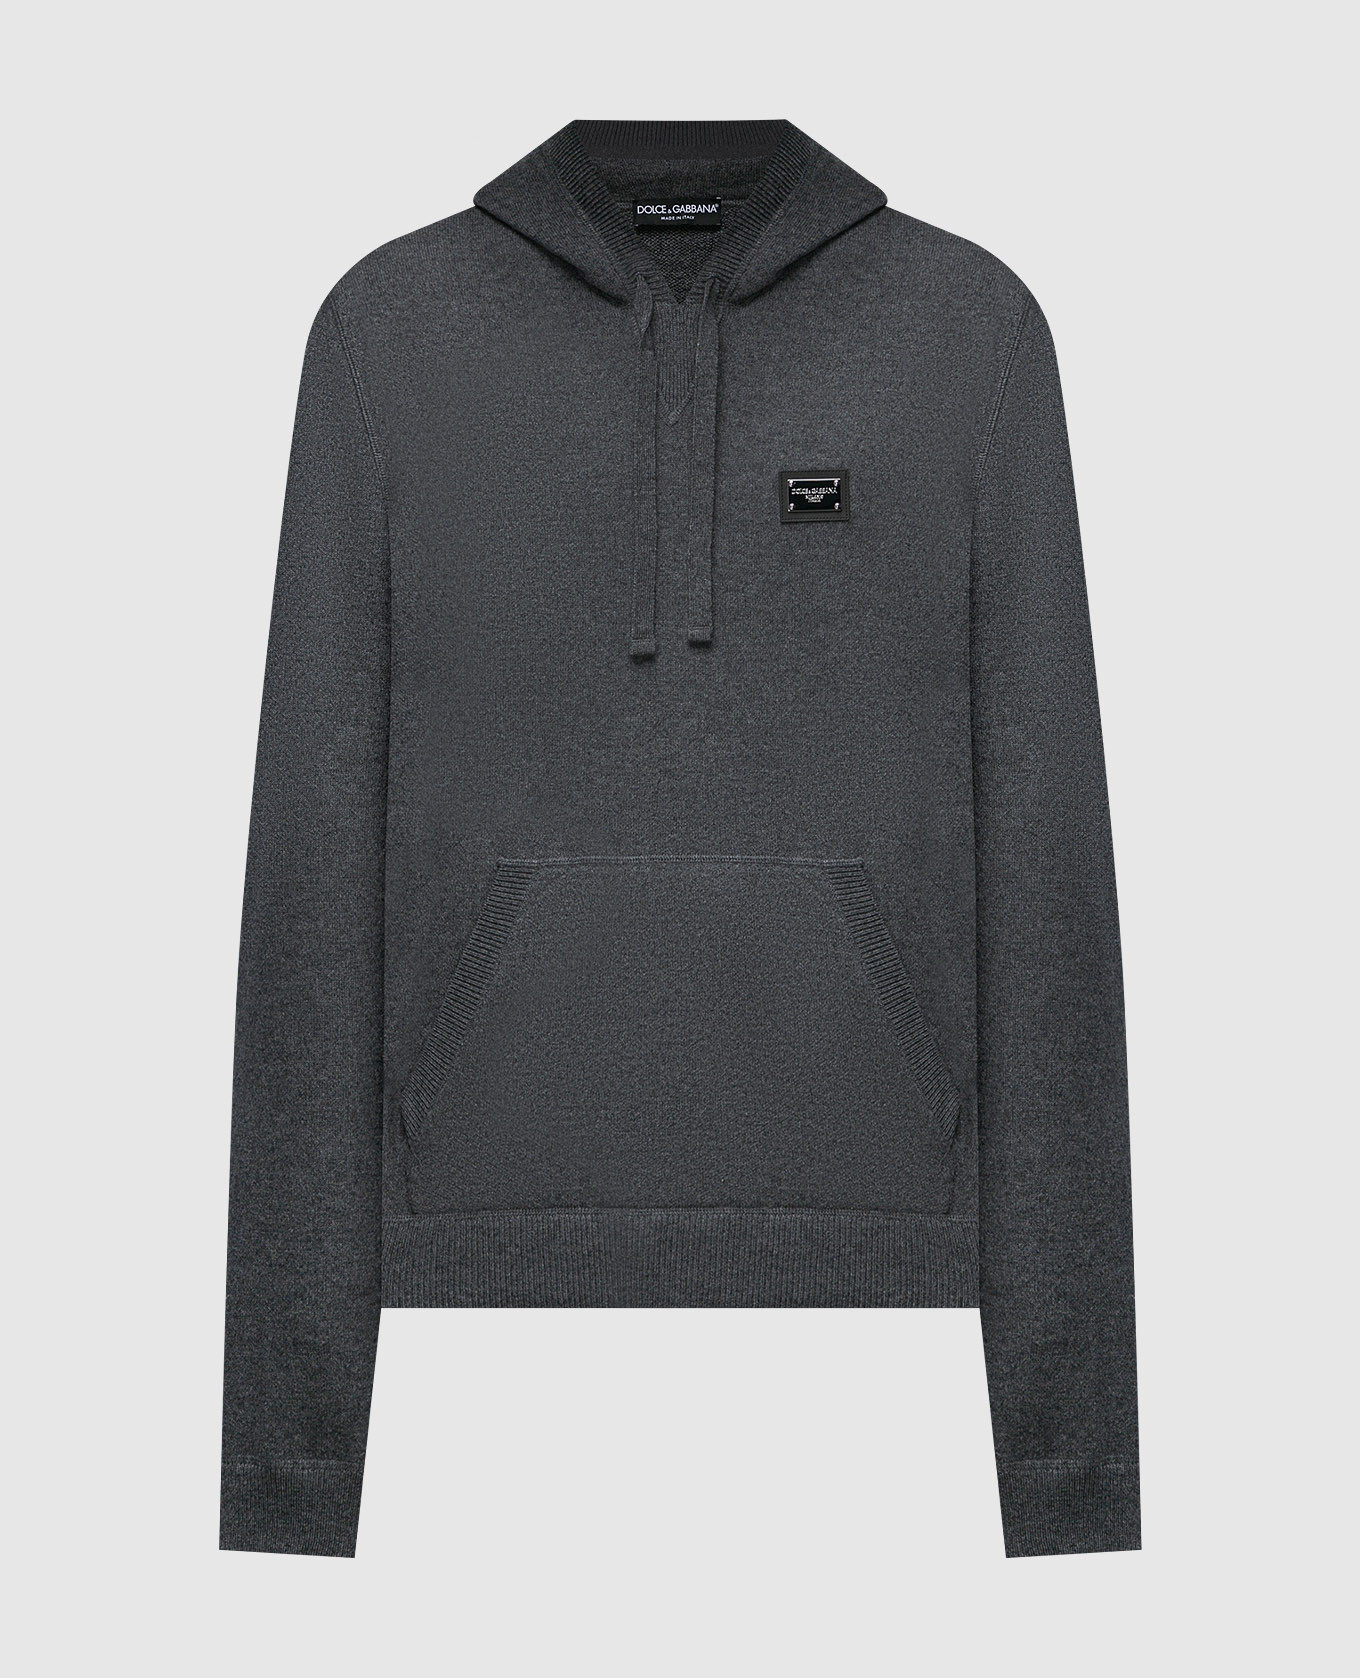 Gray wool and cashmere hoodie with metallic logo